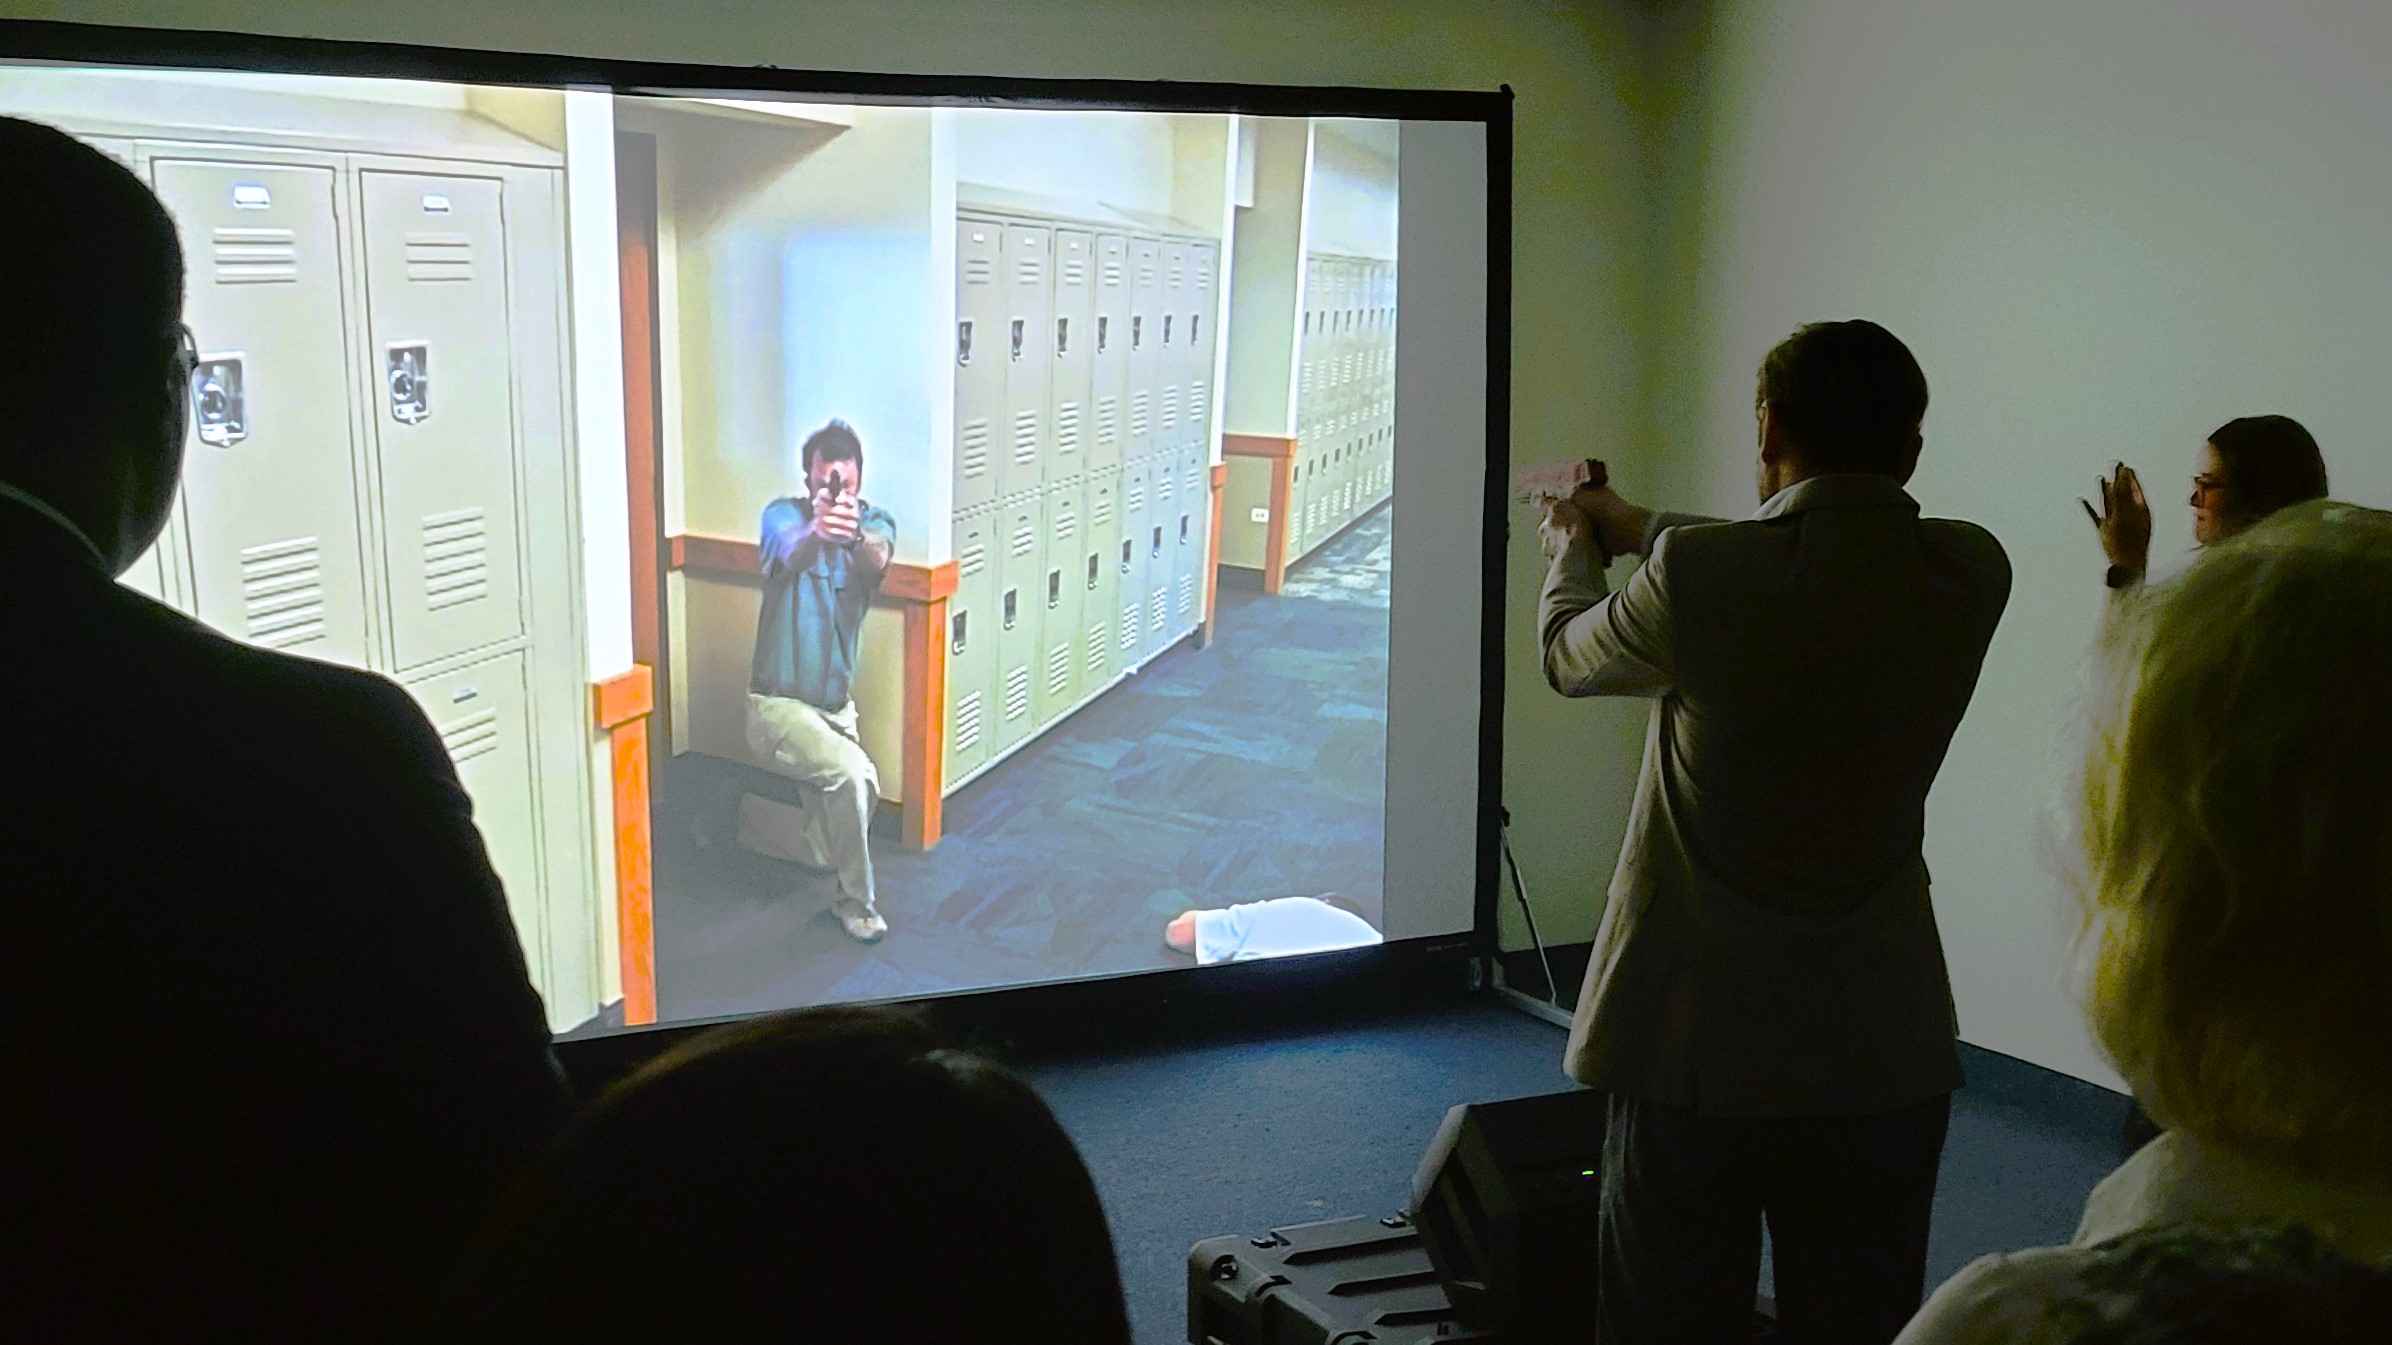 Featured image for “Keiser’s new simulator trains students for police careers”